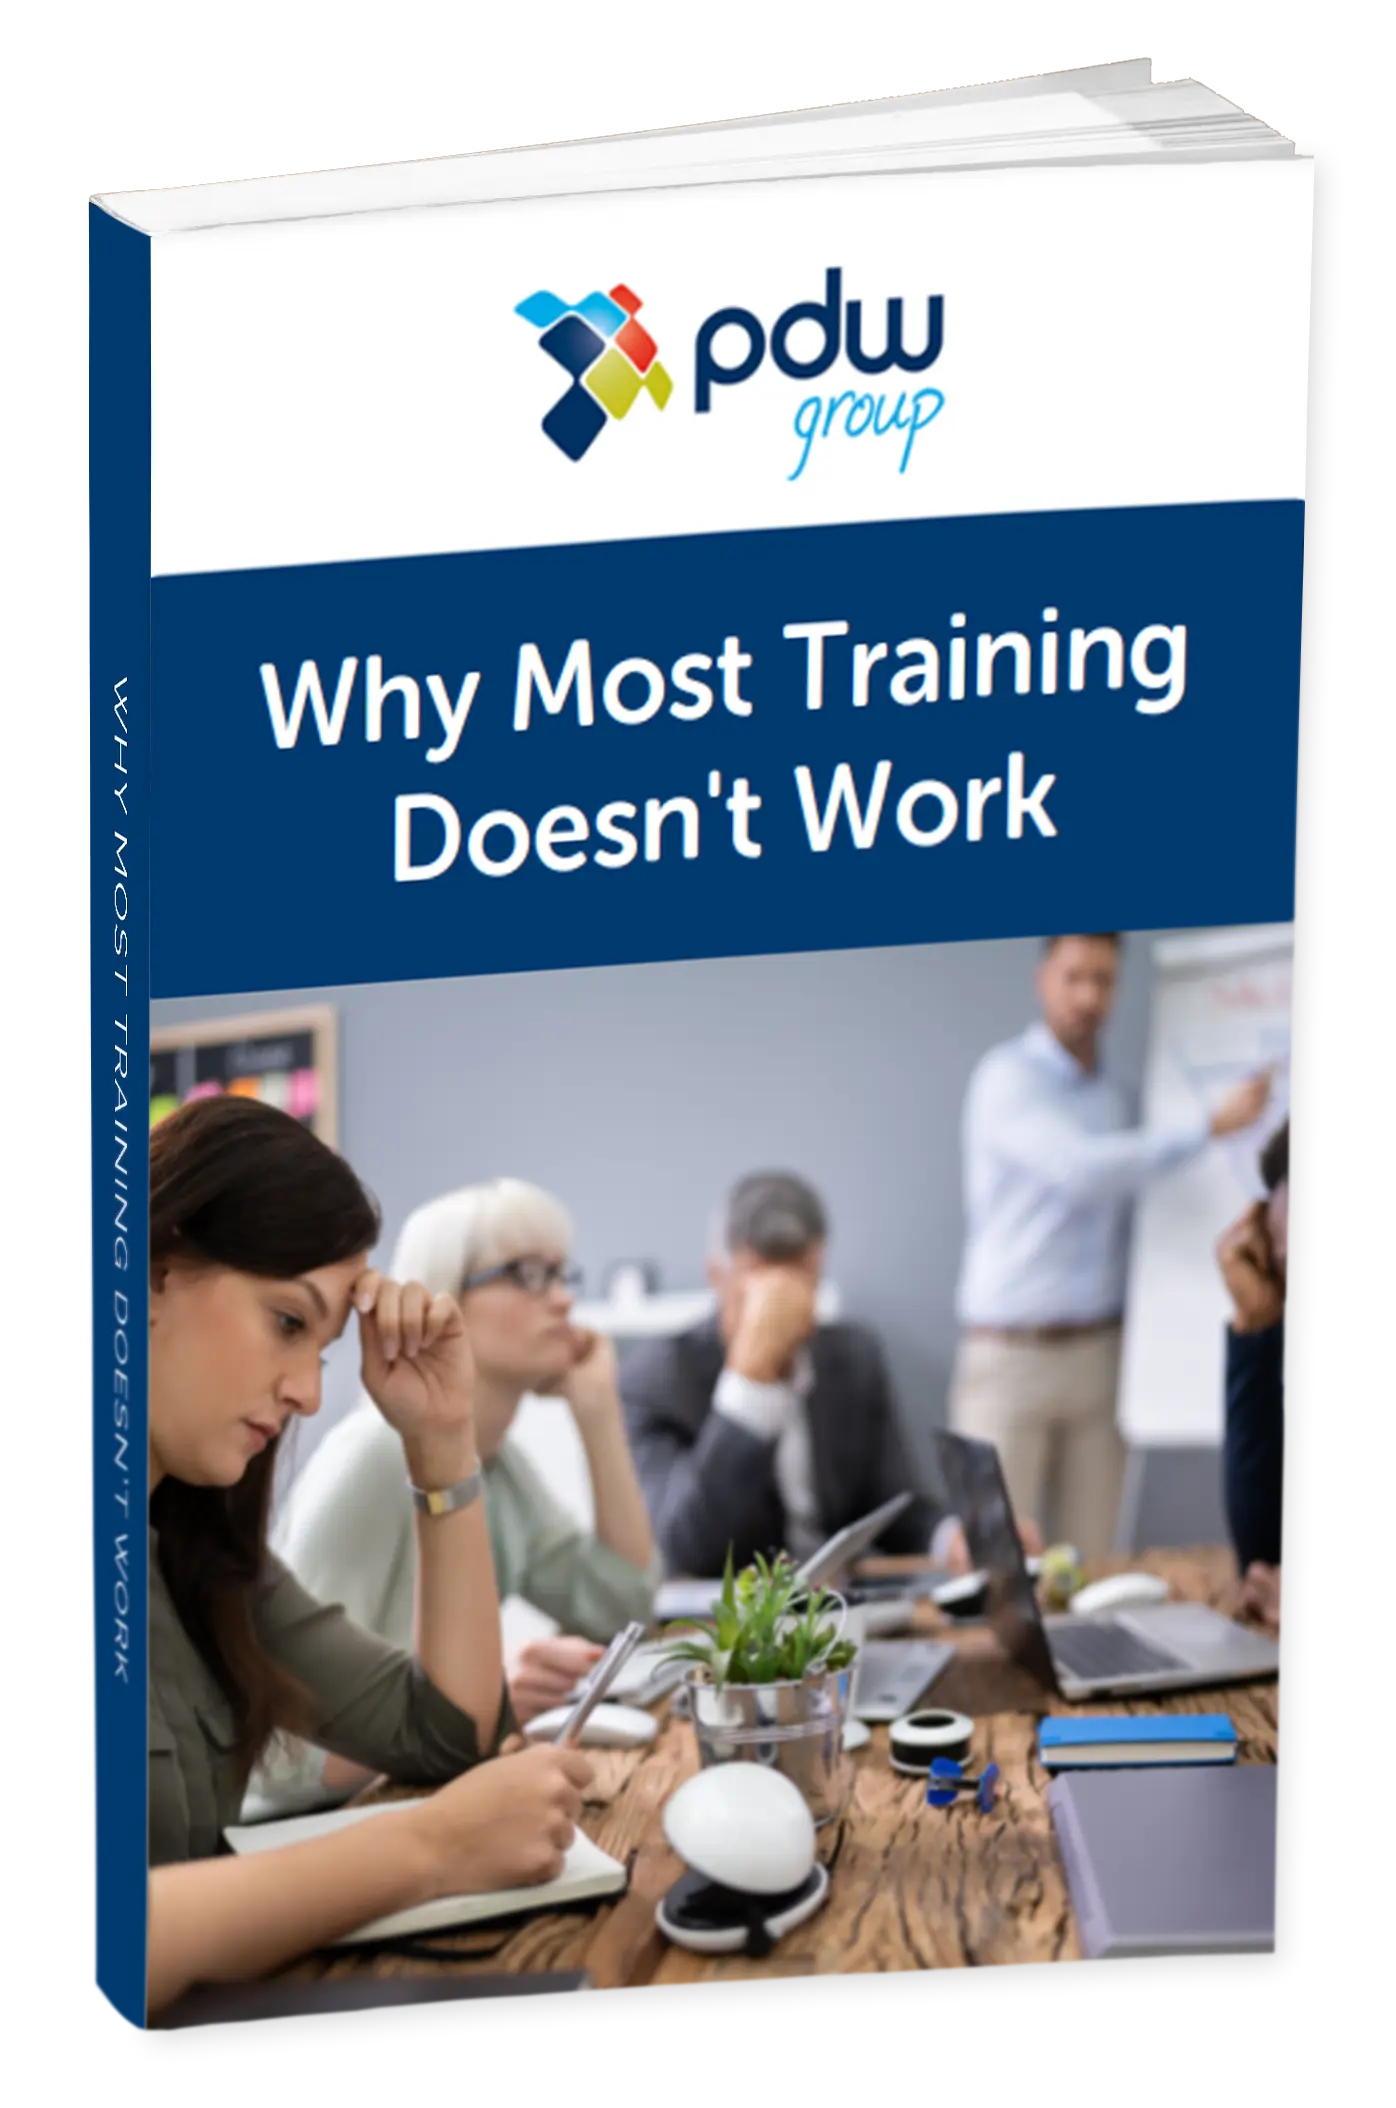 Why Most Training Doesn’t Work